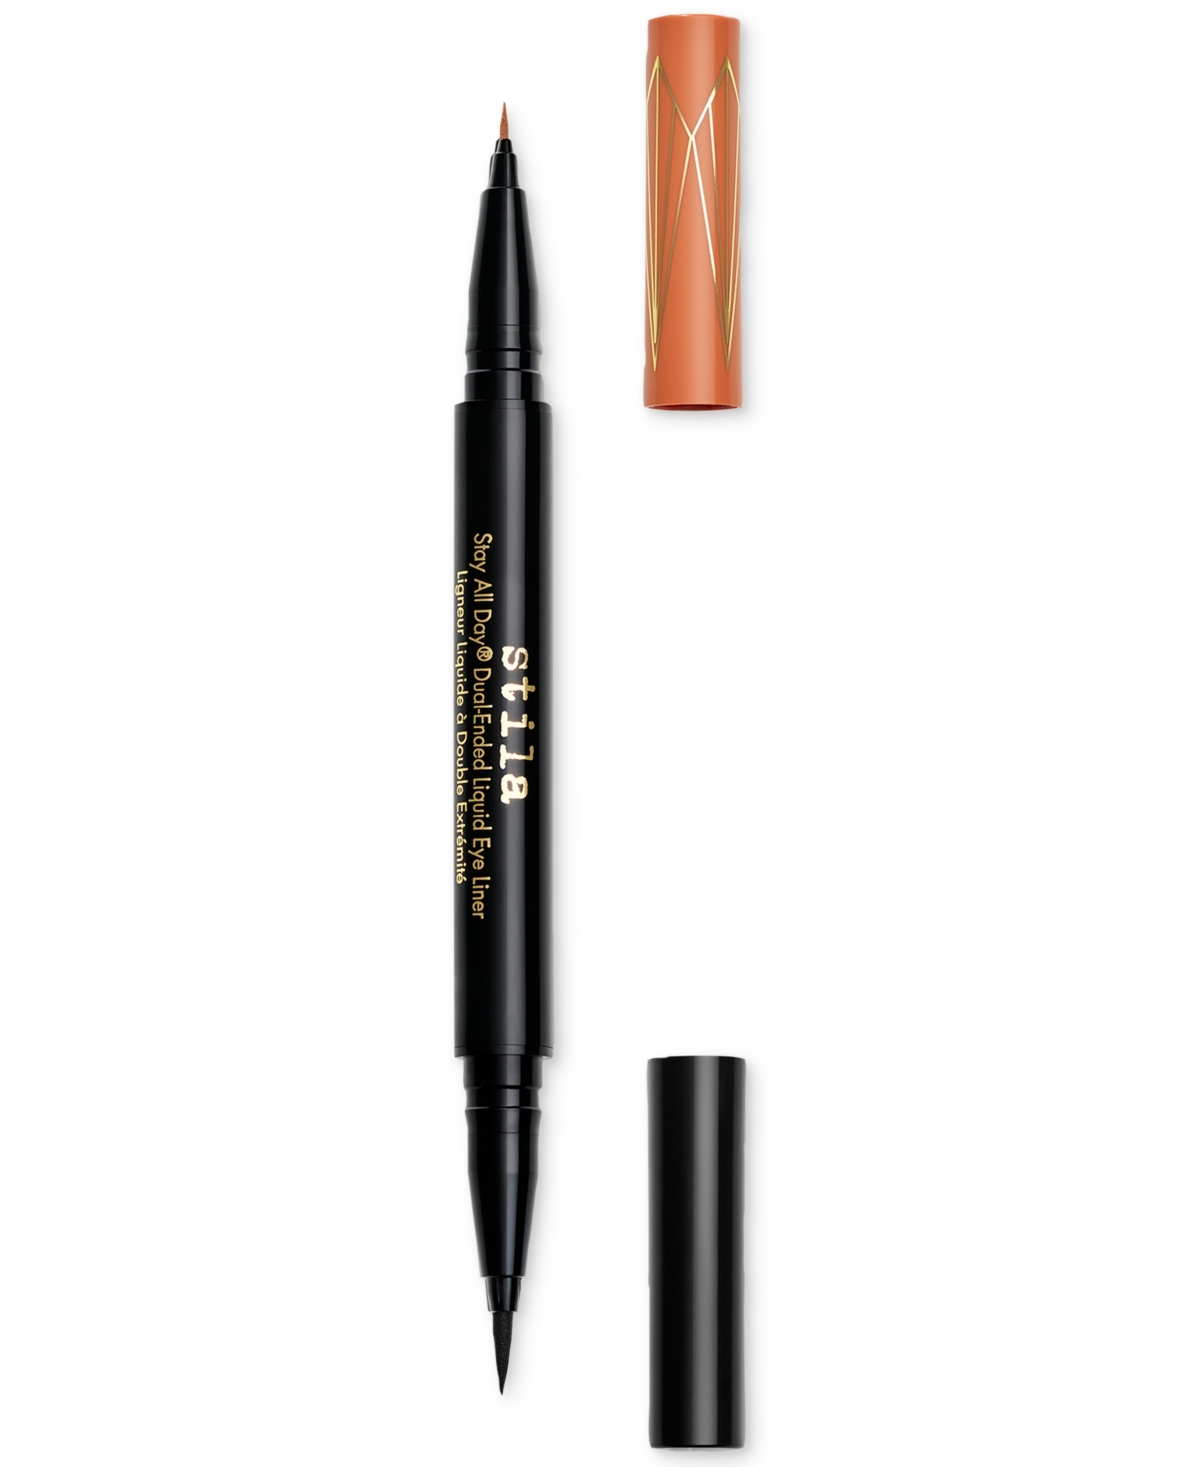 Stila Stay All Day Dual-ended Liquid Eye Liner In Mai Tai